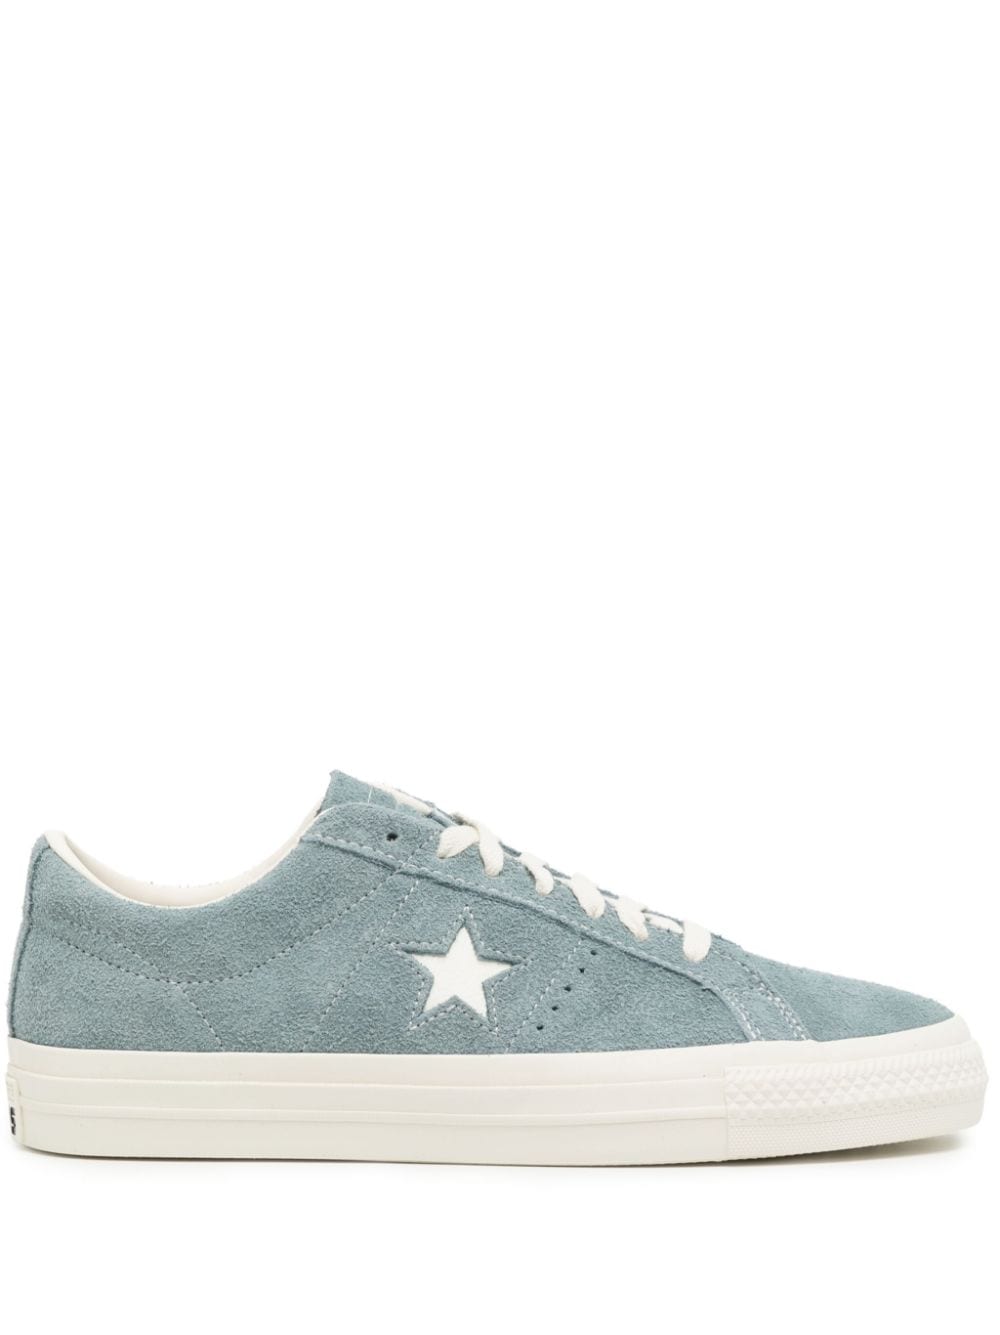 CONVERSE ONE STAR PRO LOW OX SUEDE SNEAKERS